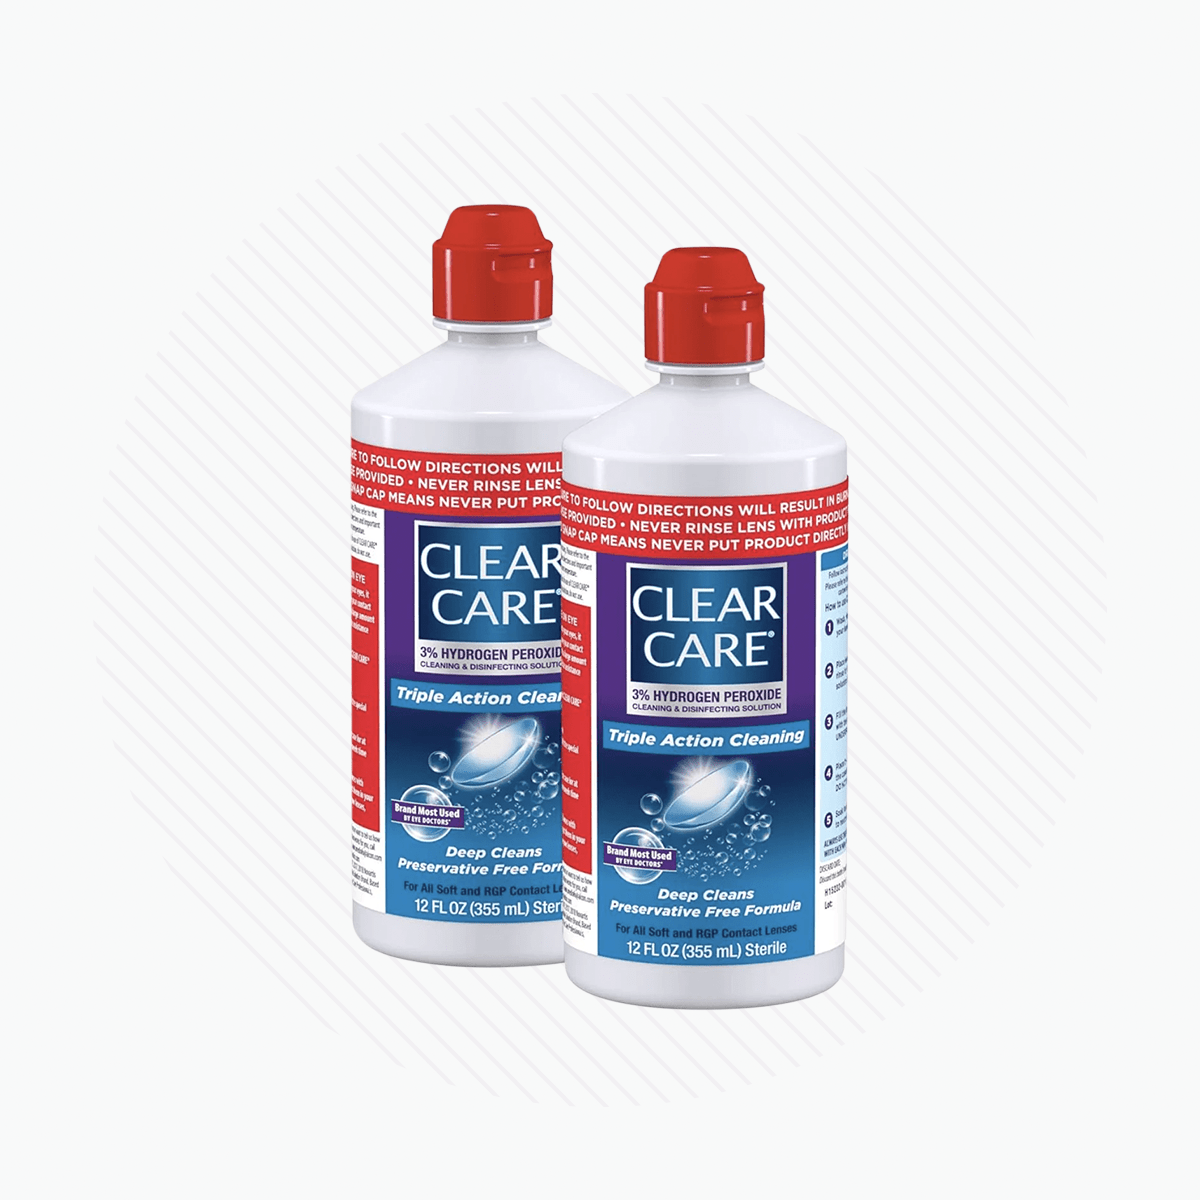 Clear Care Triple Action Cleaning and Disinfecting Solution with Case, Twin Pack, Multi, 12 Oz, Pack of 2 - Dryeye Rescue